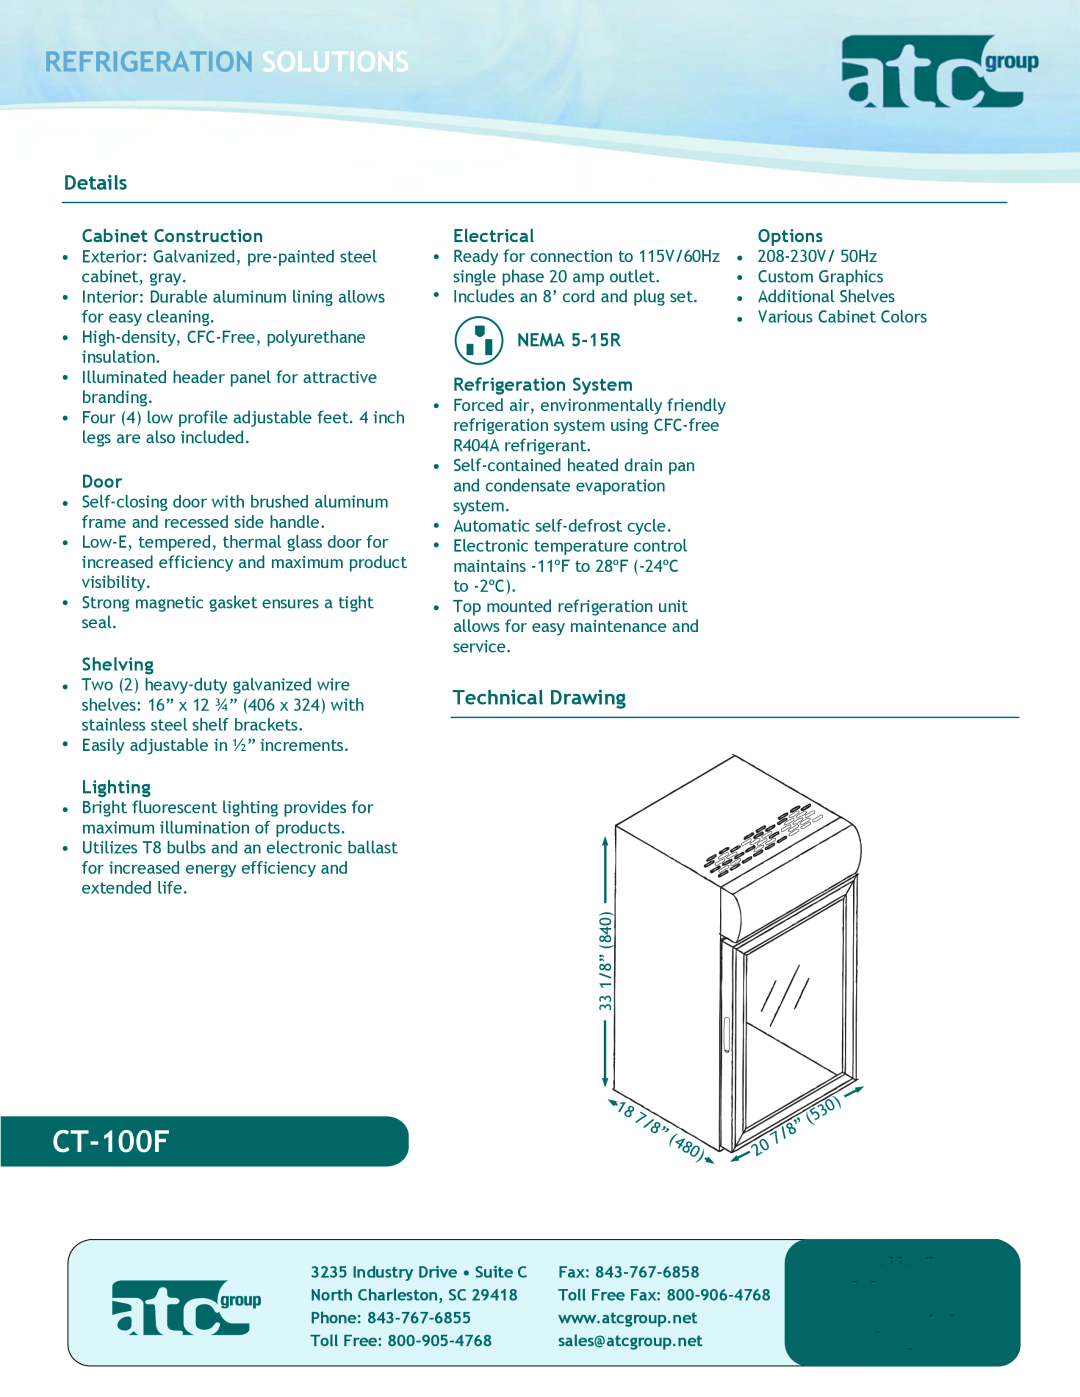 ATC Group CT100 CT-100F, Refrigeration Solutions, Details, Technical Drawing, Cabinet Construction, Door, Shelving 